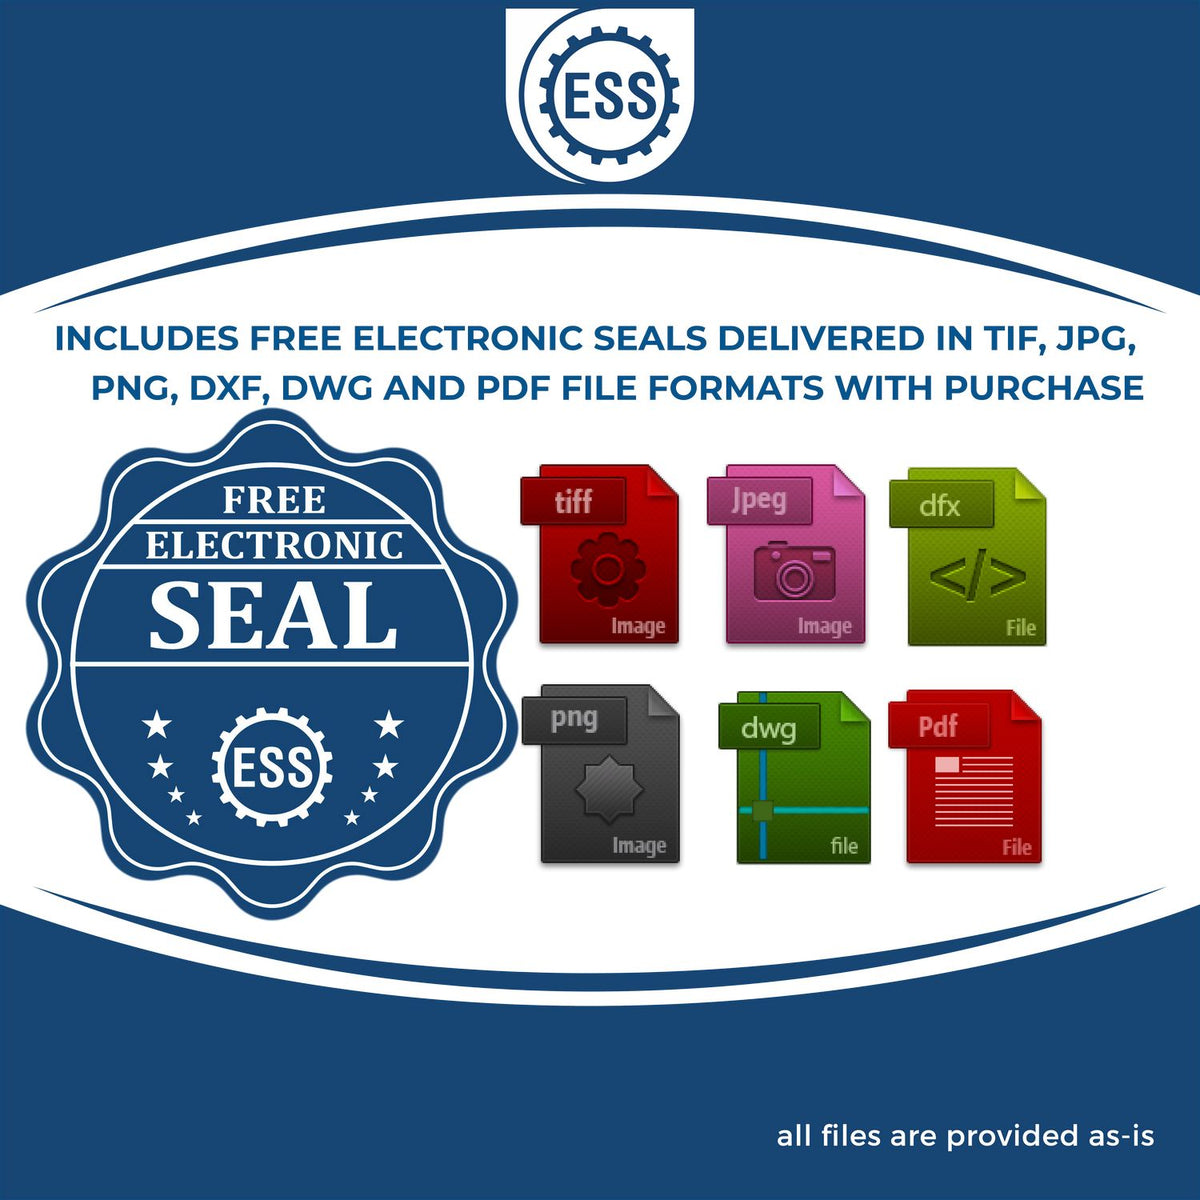 An infographic for the free electronic seal for the Slim Pre-Inked Pennsylvania Land Surveyor Seal Stamp illustrating the different file type icons such as DXF, DWG, TIF, JPG and PNG.